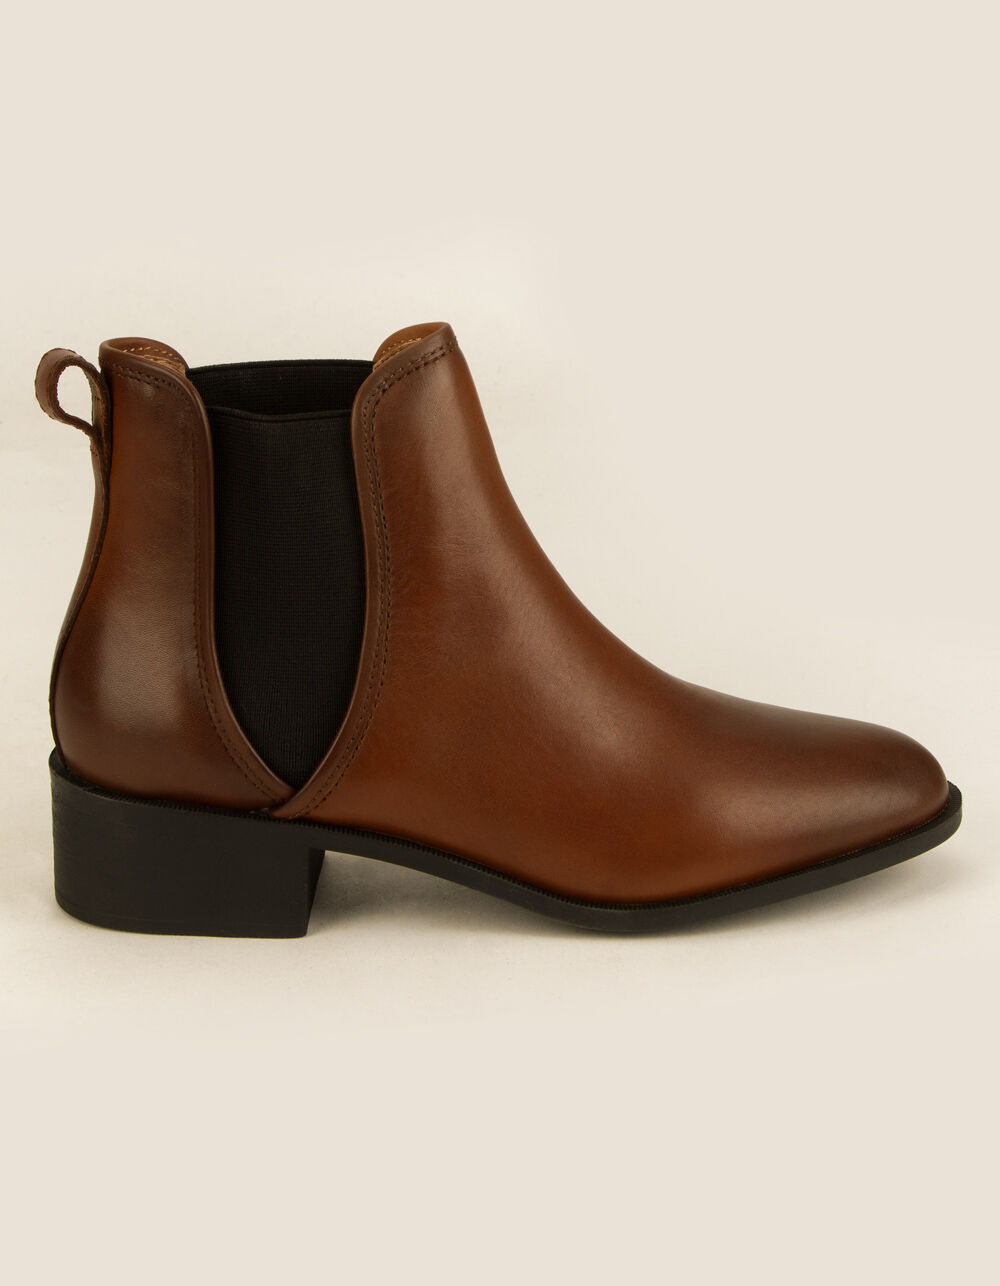 STEVE MADDEN Dares Leather Womens Chelsea Boots - COGNAC | Tillys